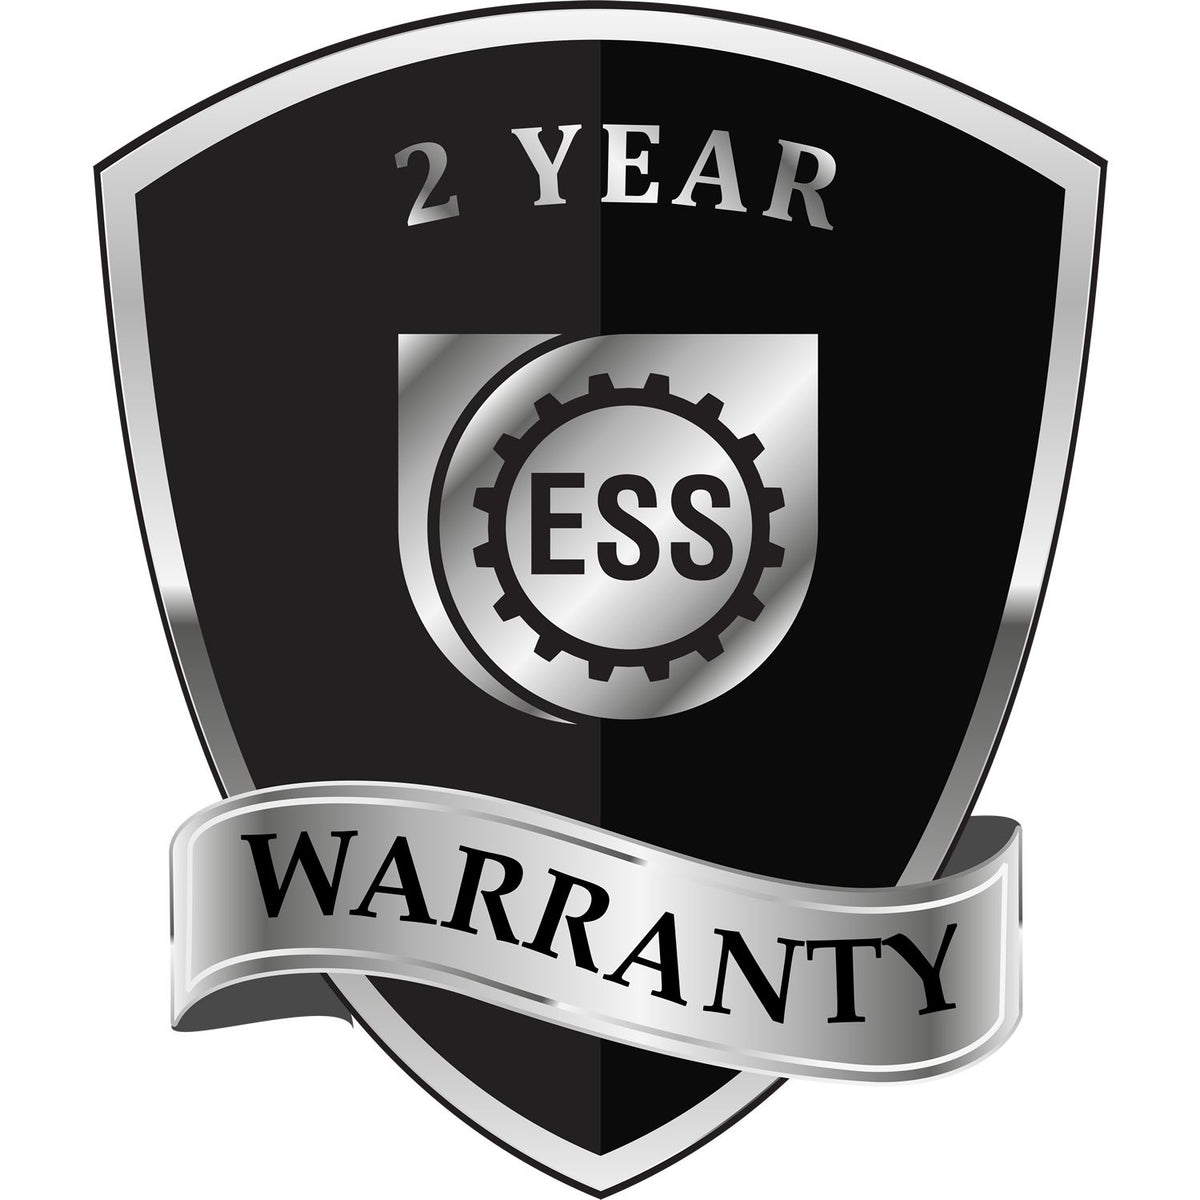 A badge or emblem showing a warranty icon for the Heavy Duty Cast Iron Wyoming Architect Embosser